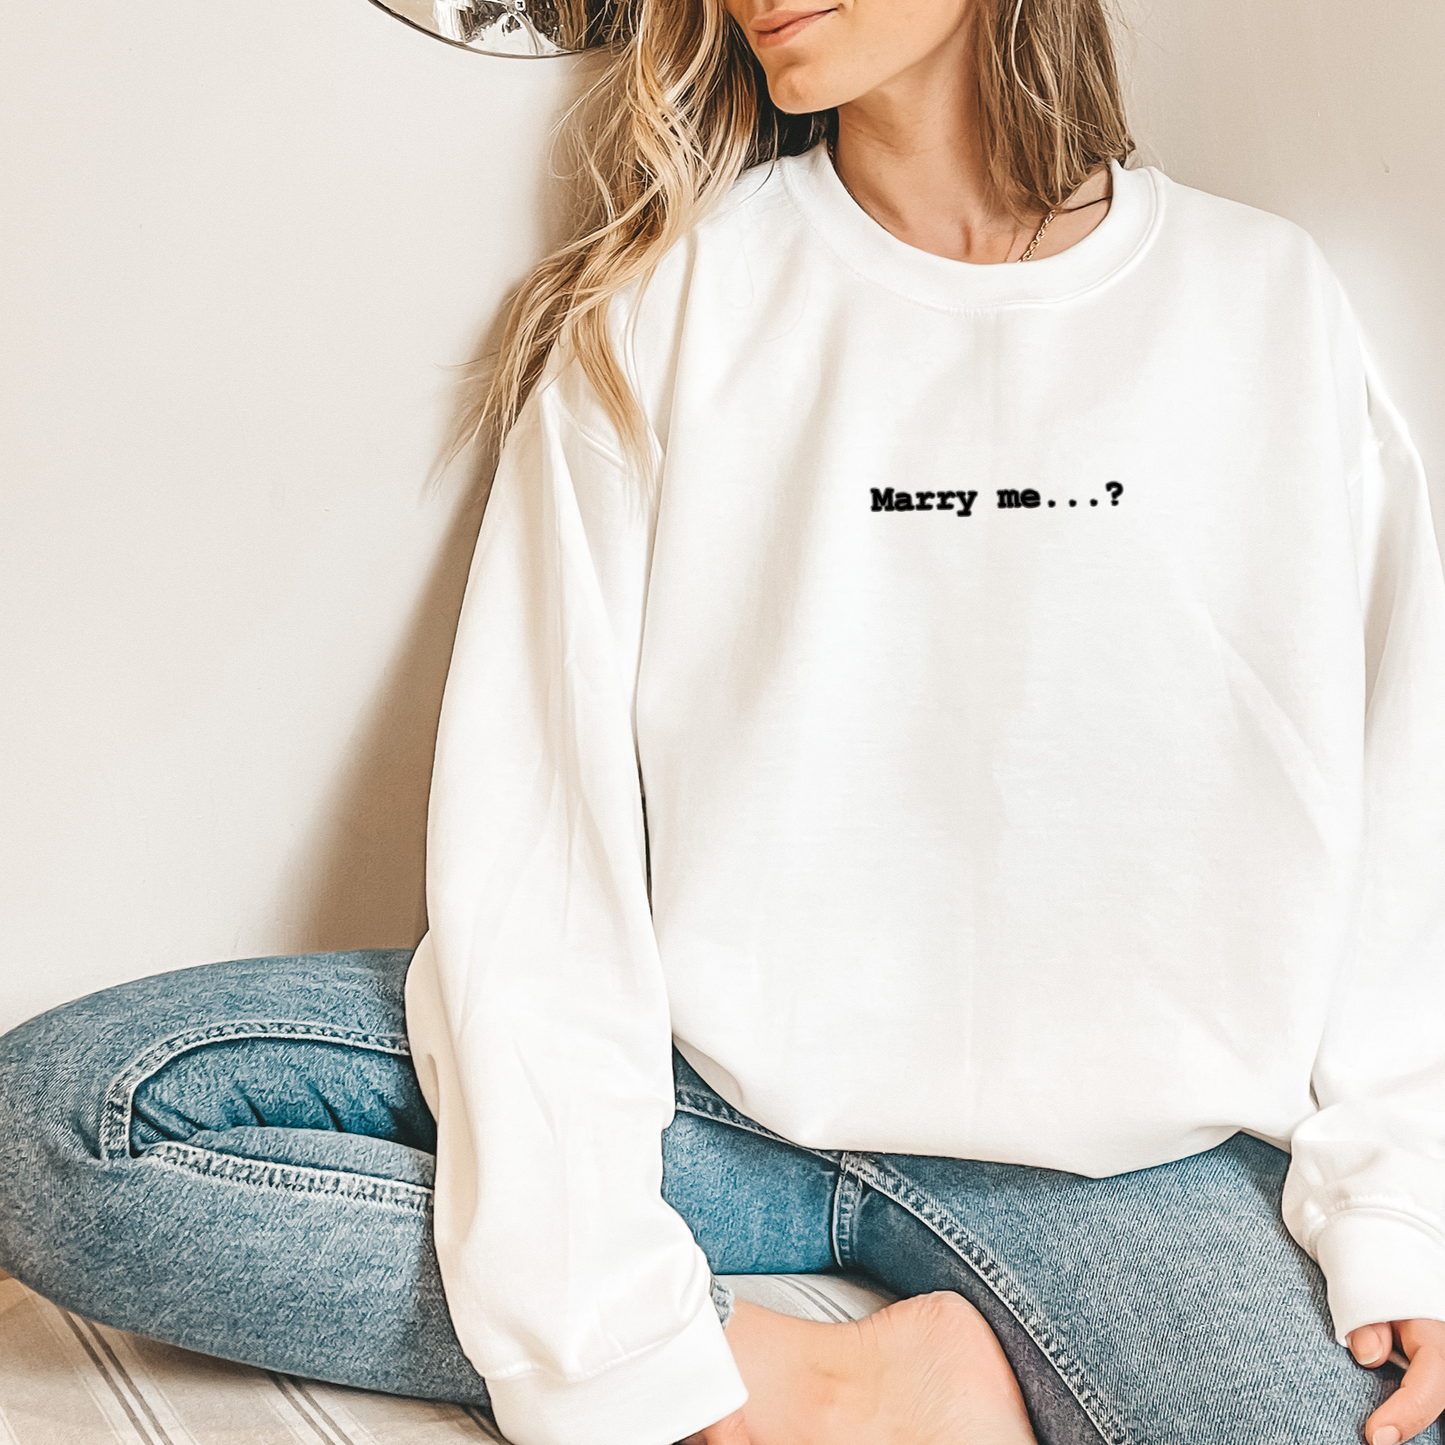 F&B Crafts White Embroidered "Marry me...?" Sweatshirt by F&B Crafts